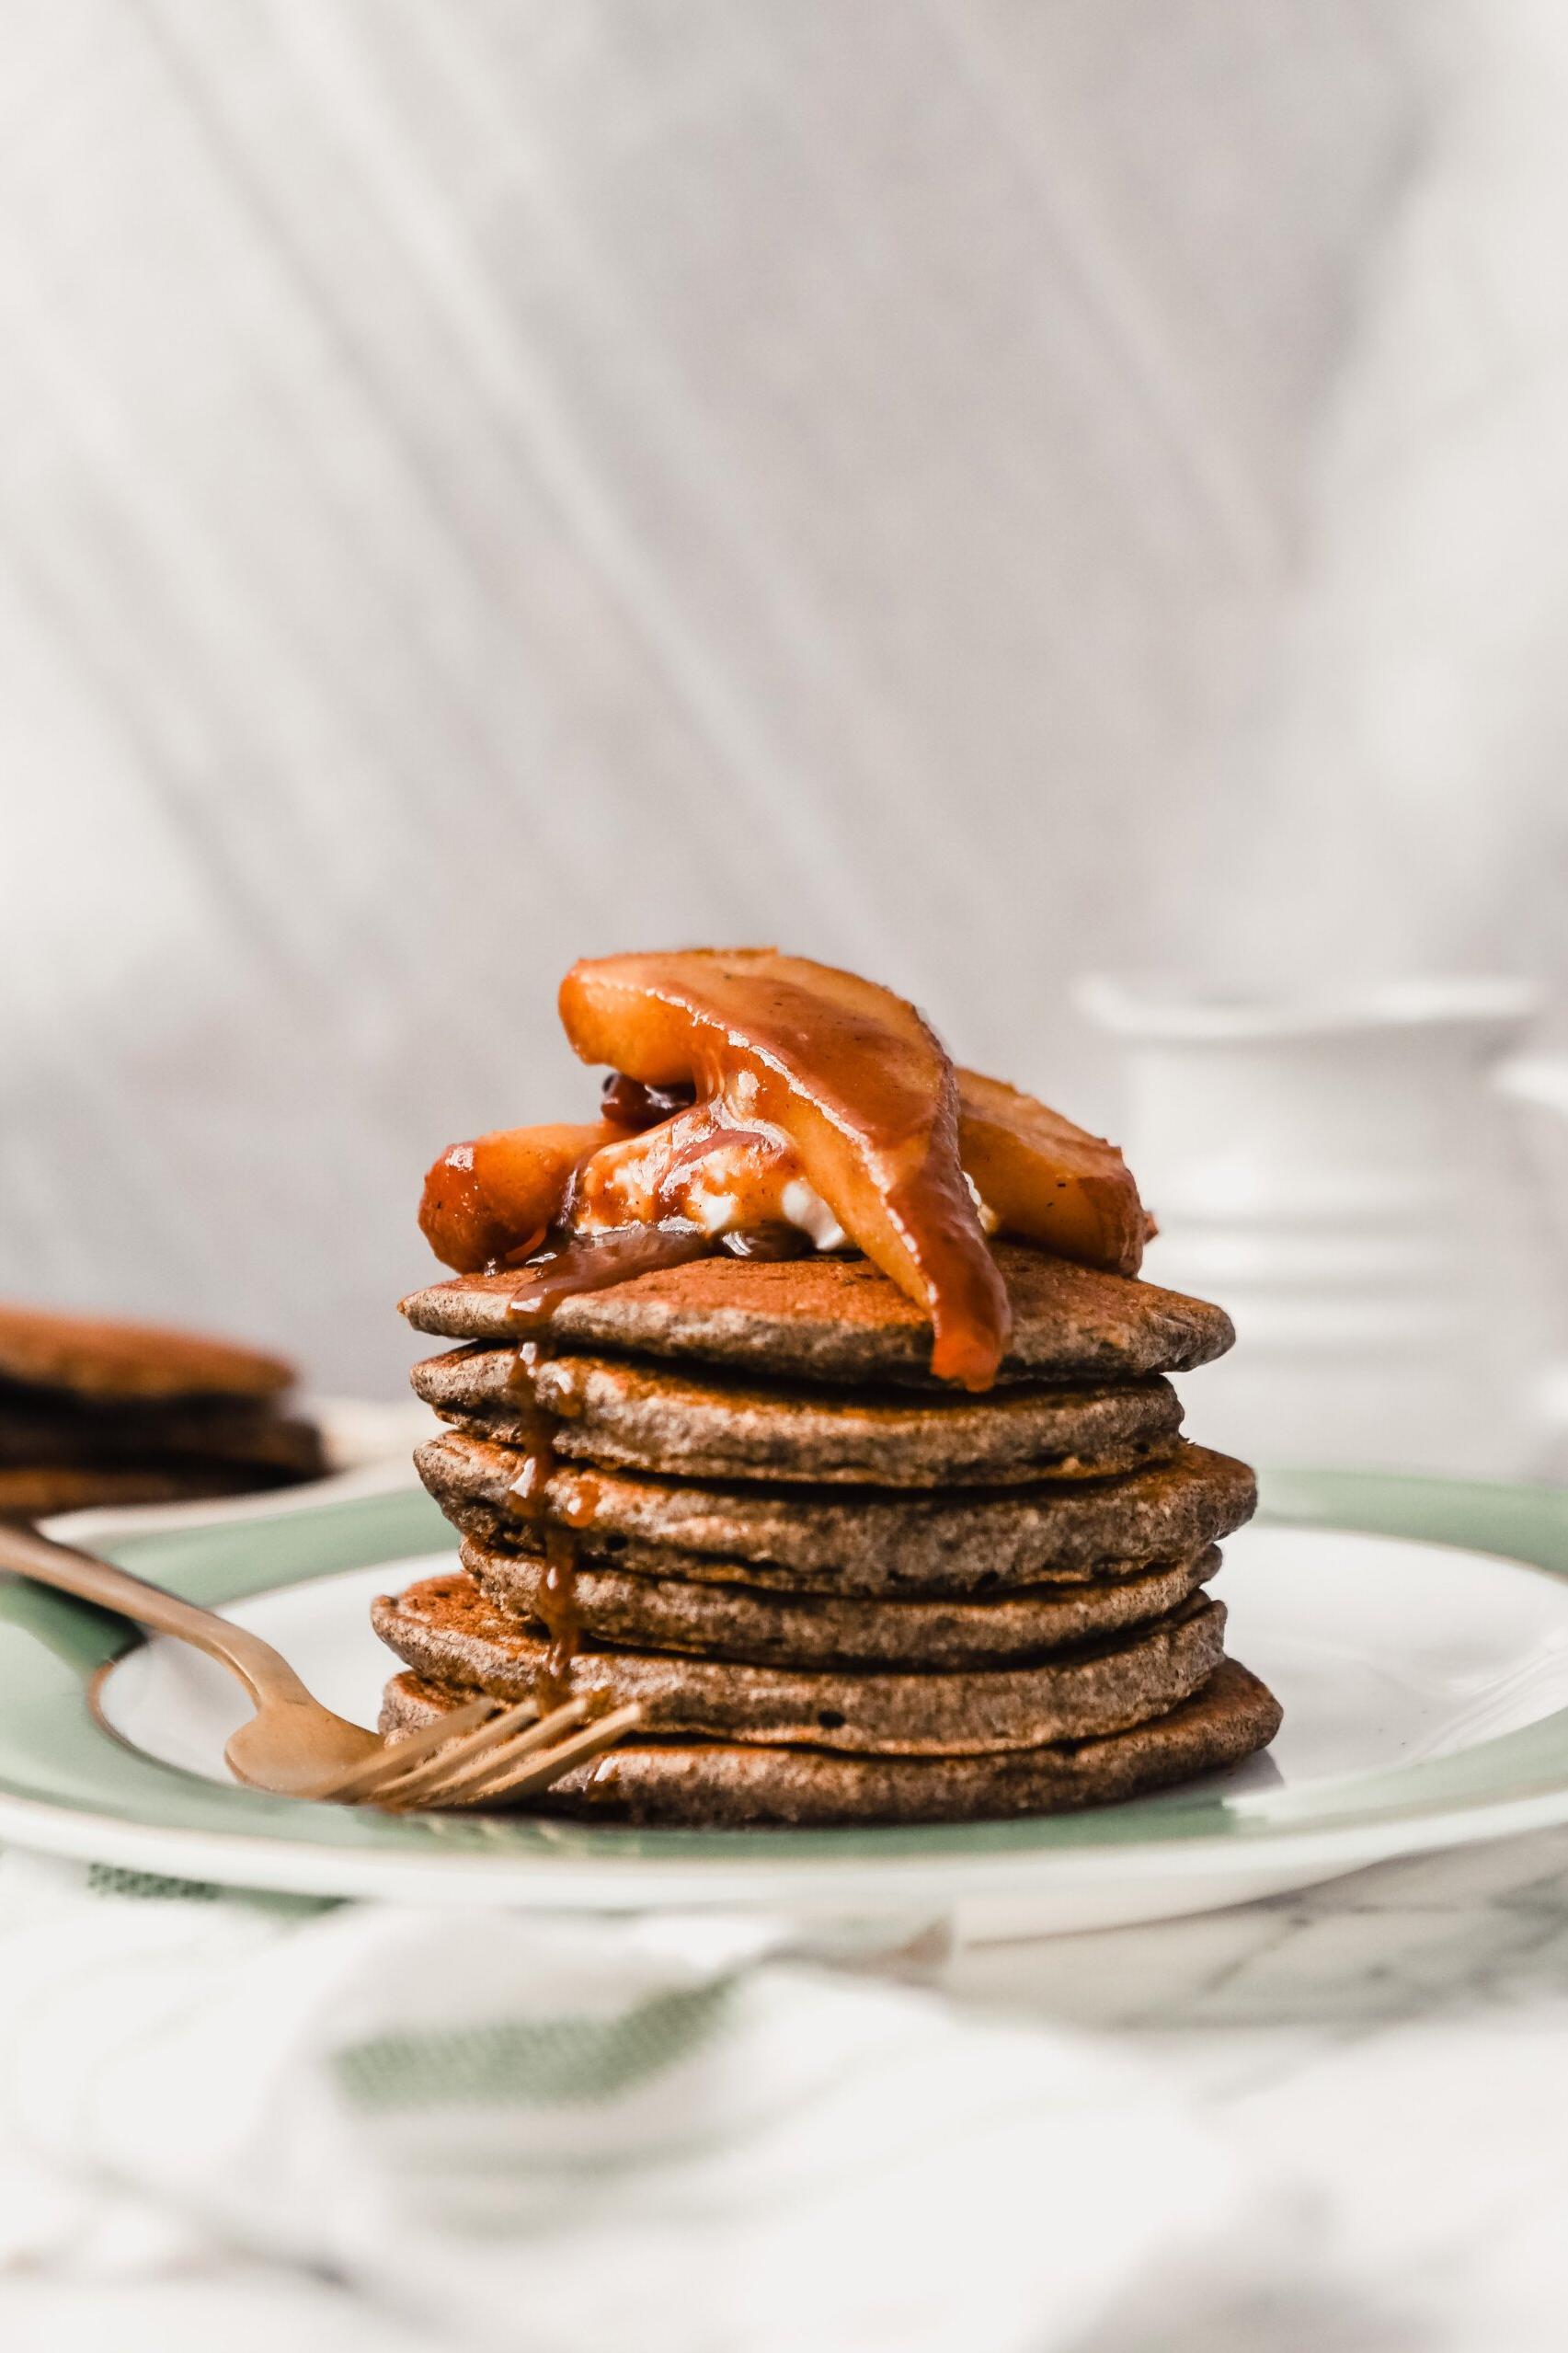  Gluten-free and dairy-free pancakes never tasted so good!